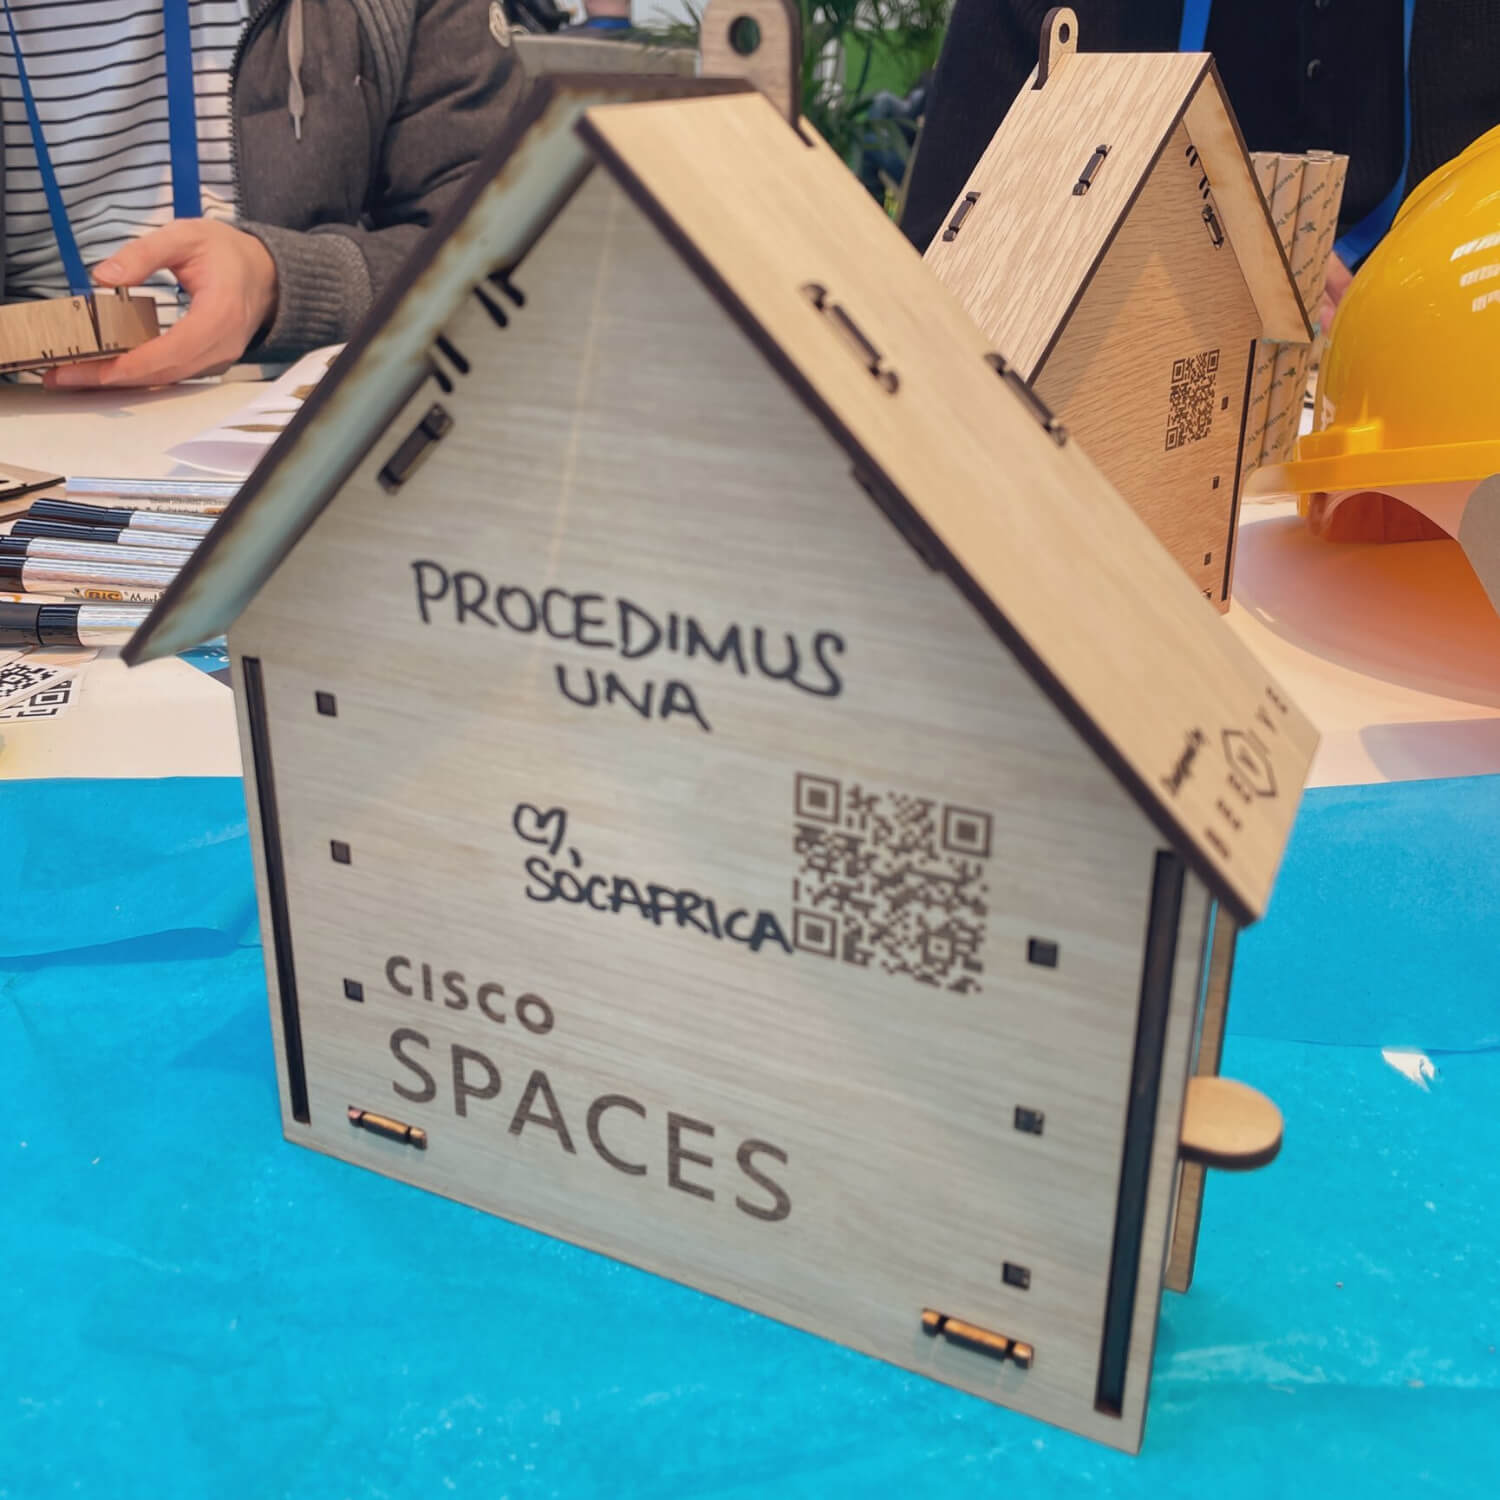 procedimus una bee hotels made for cisco spaces event